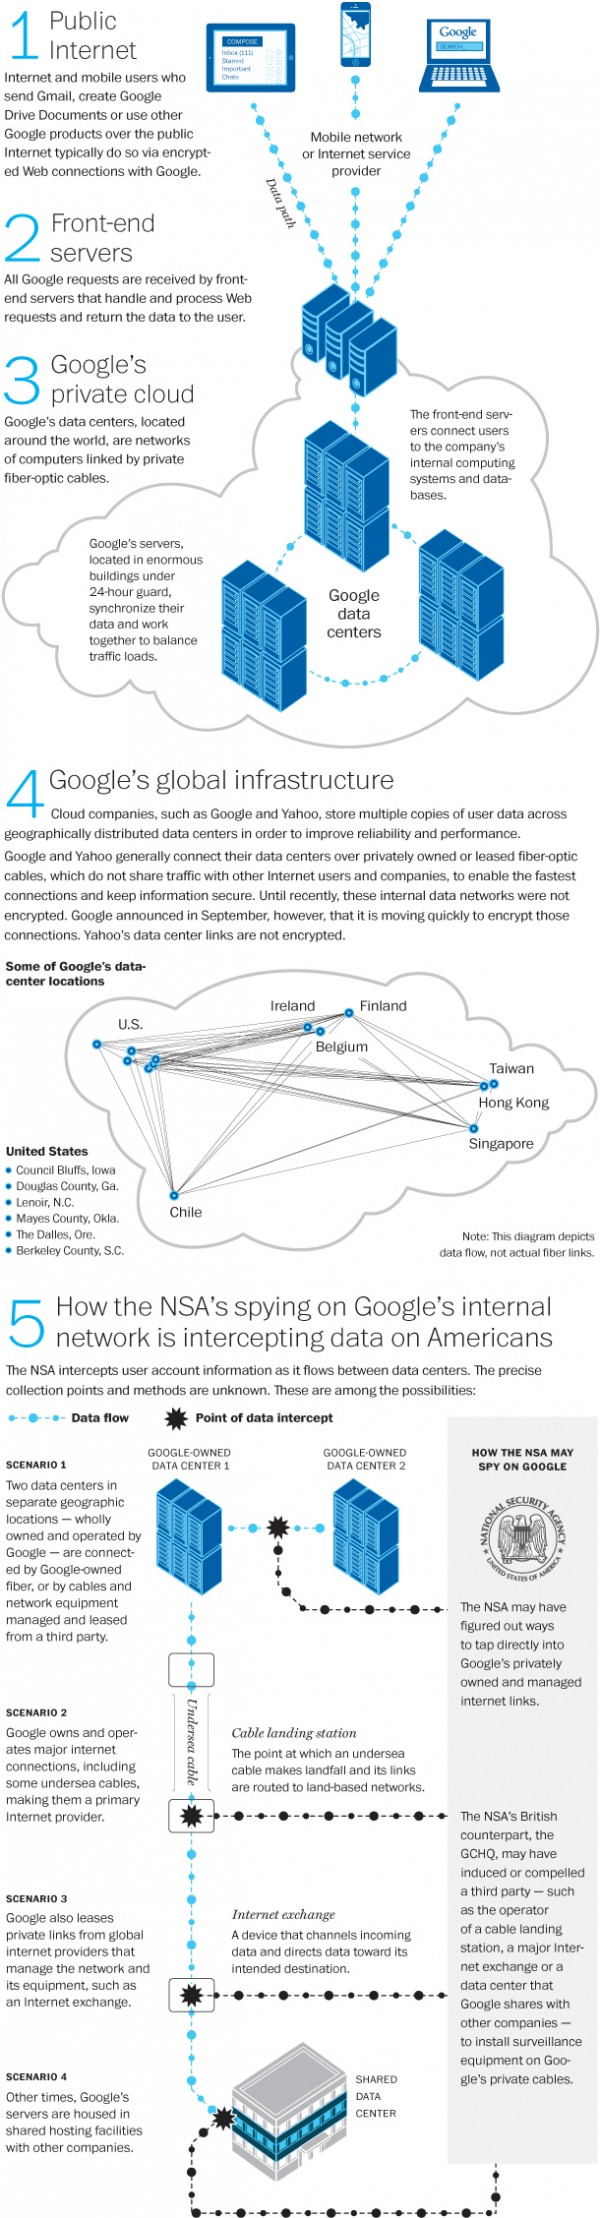 How the NSA is infiltrating private networks